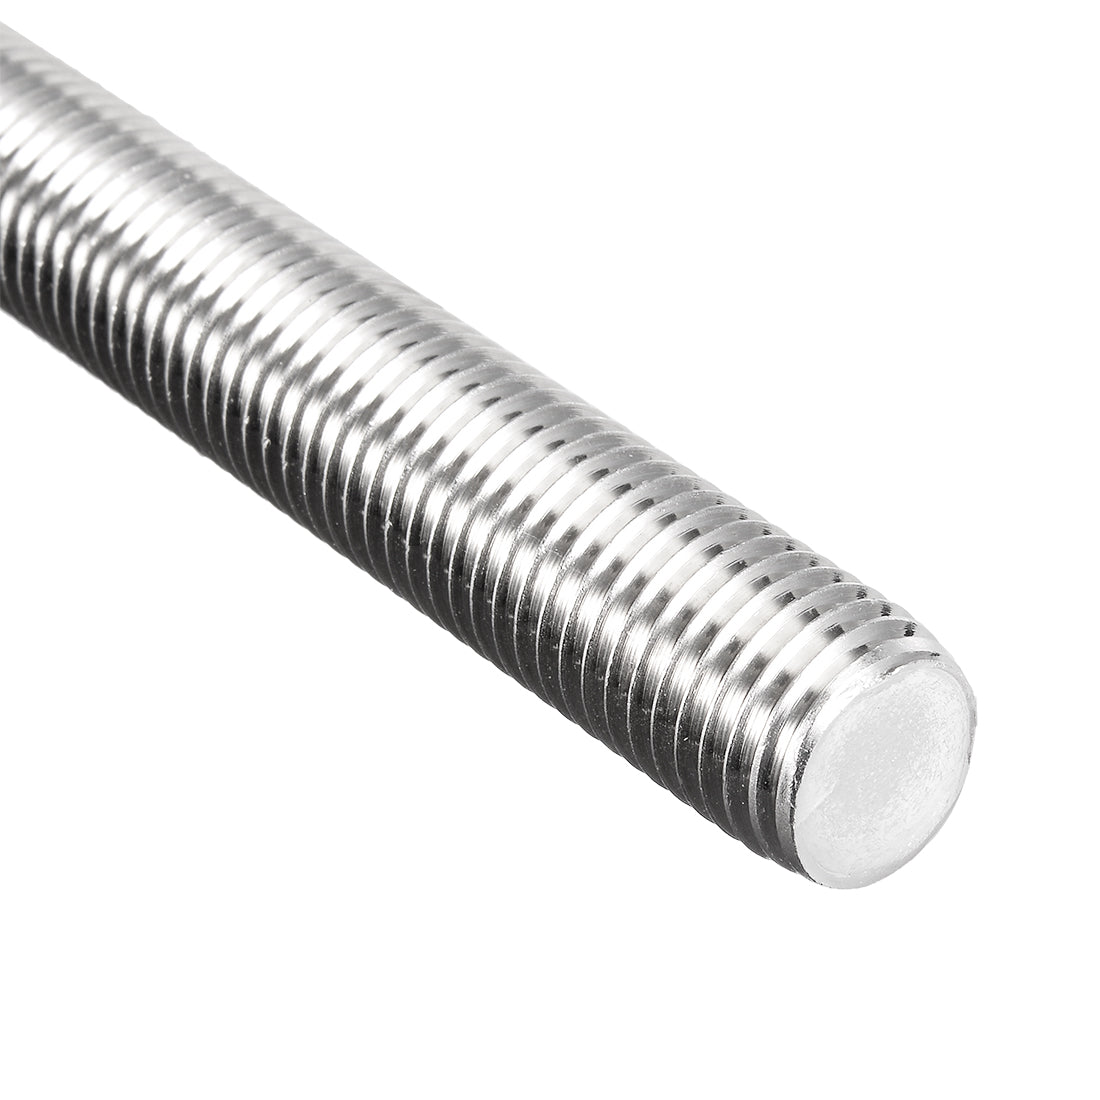 uxcell Uxcell M20 x 500mm Fully Threaded Rod 304 Stainless Steel Right Hand Threads